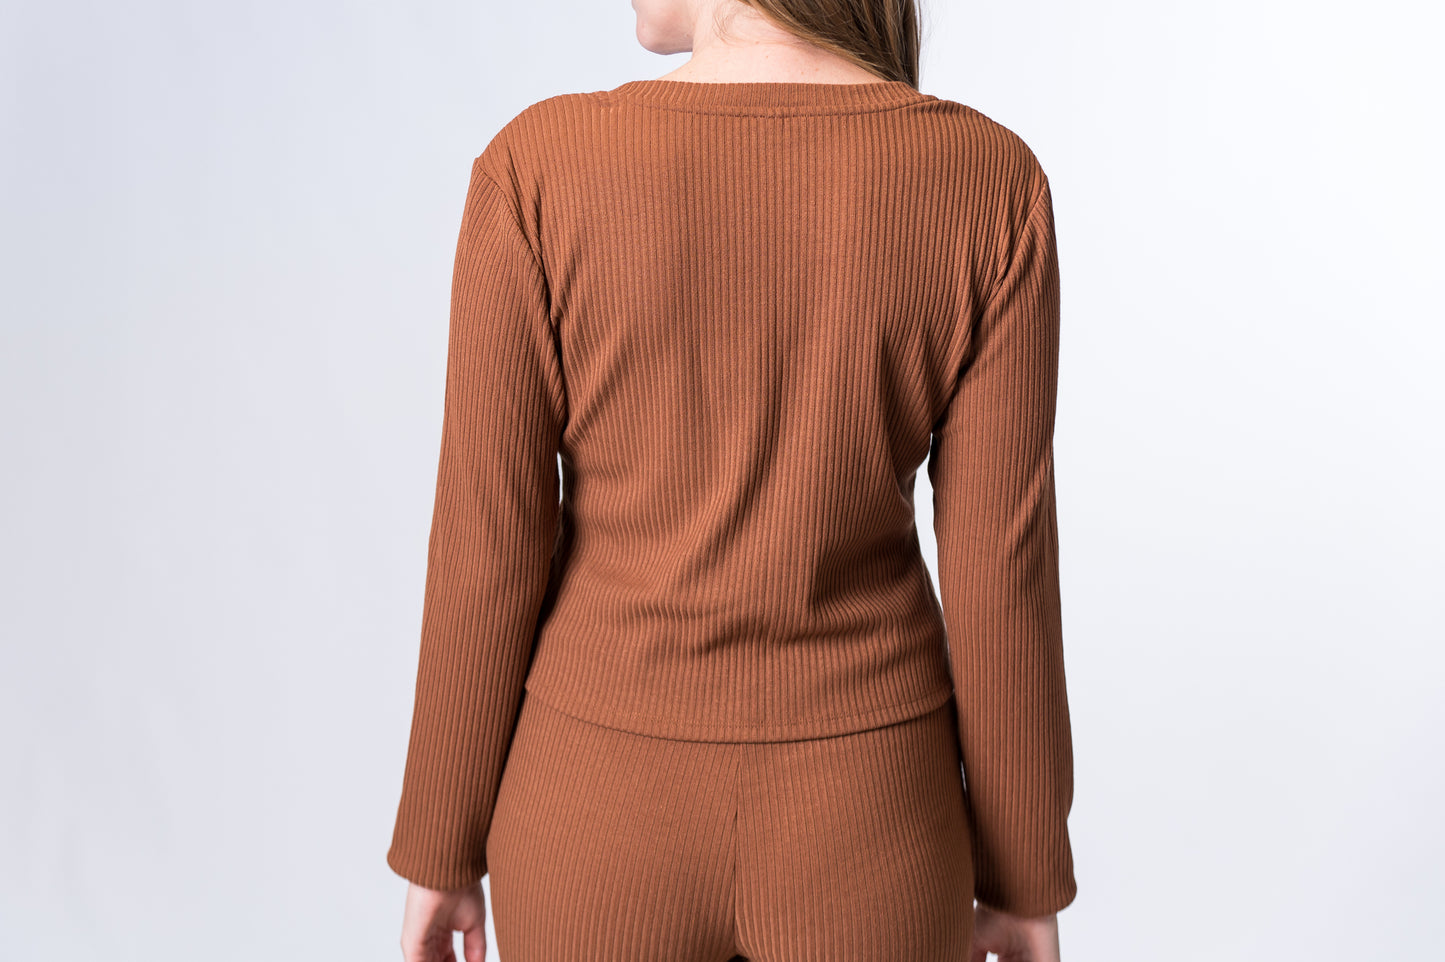 Woman wearing a brown, ribbed long sleeve lounge top with matching pants. Back of clothing is being shown